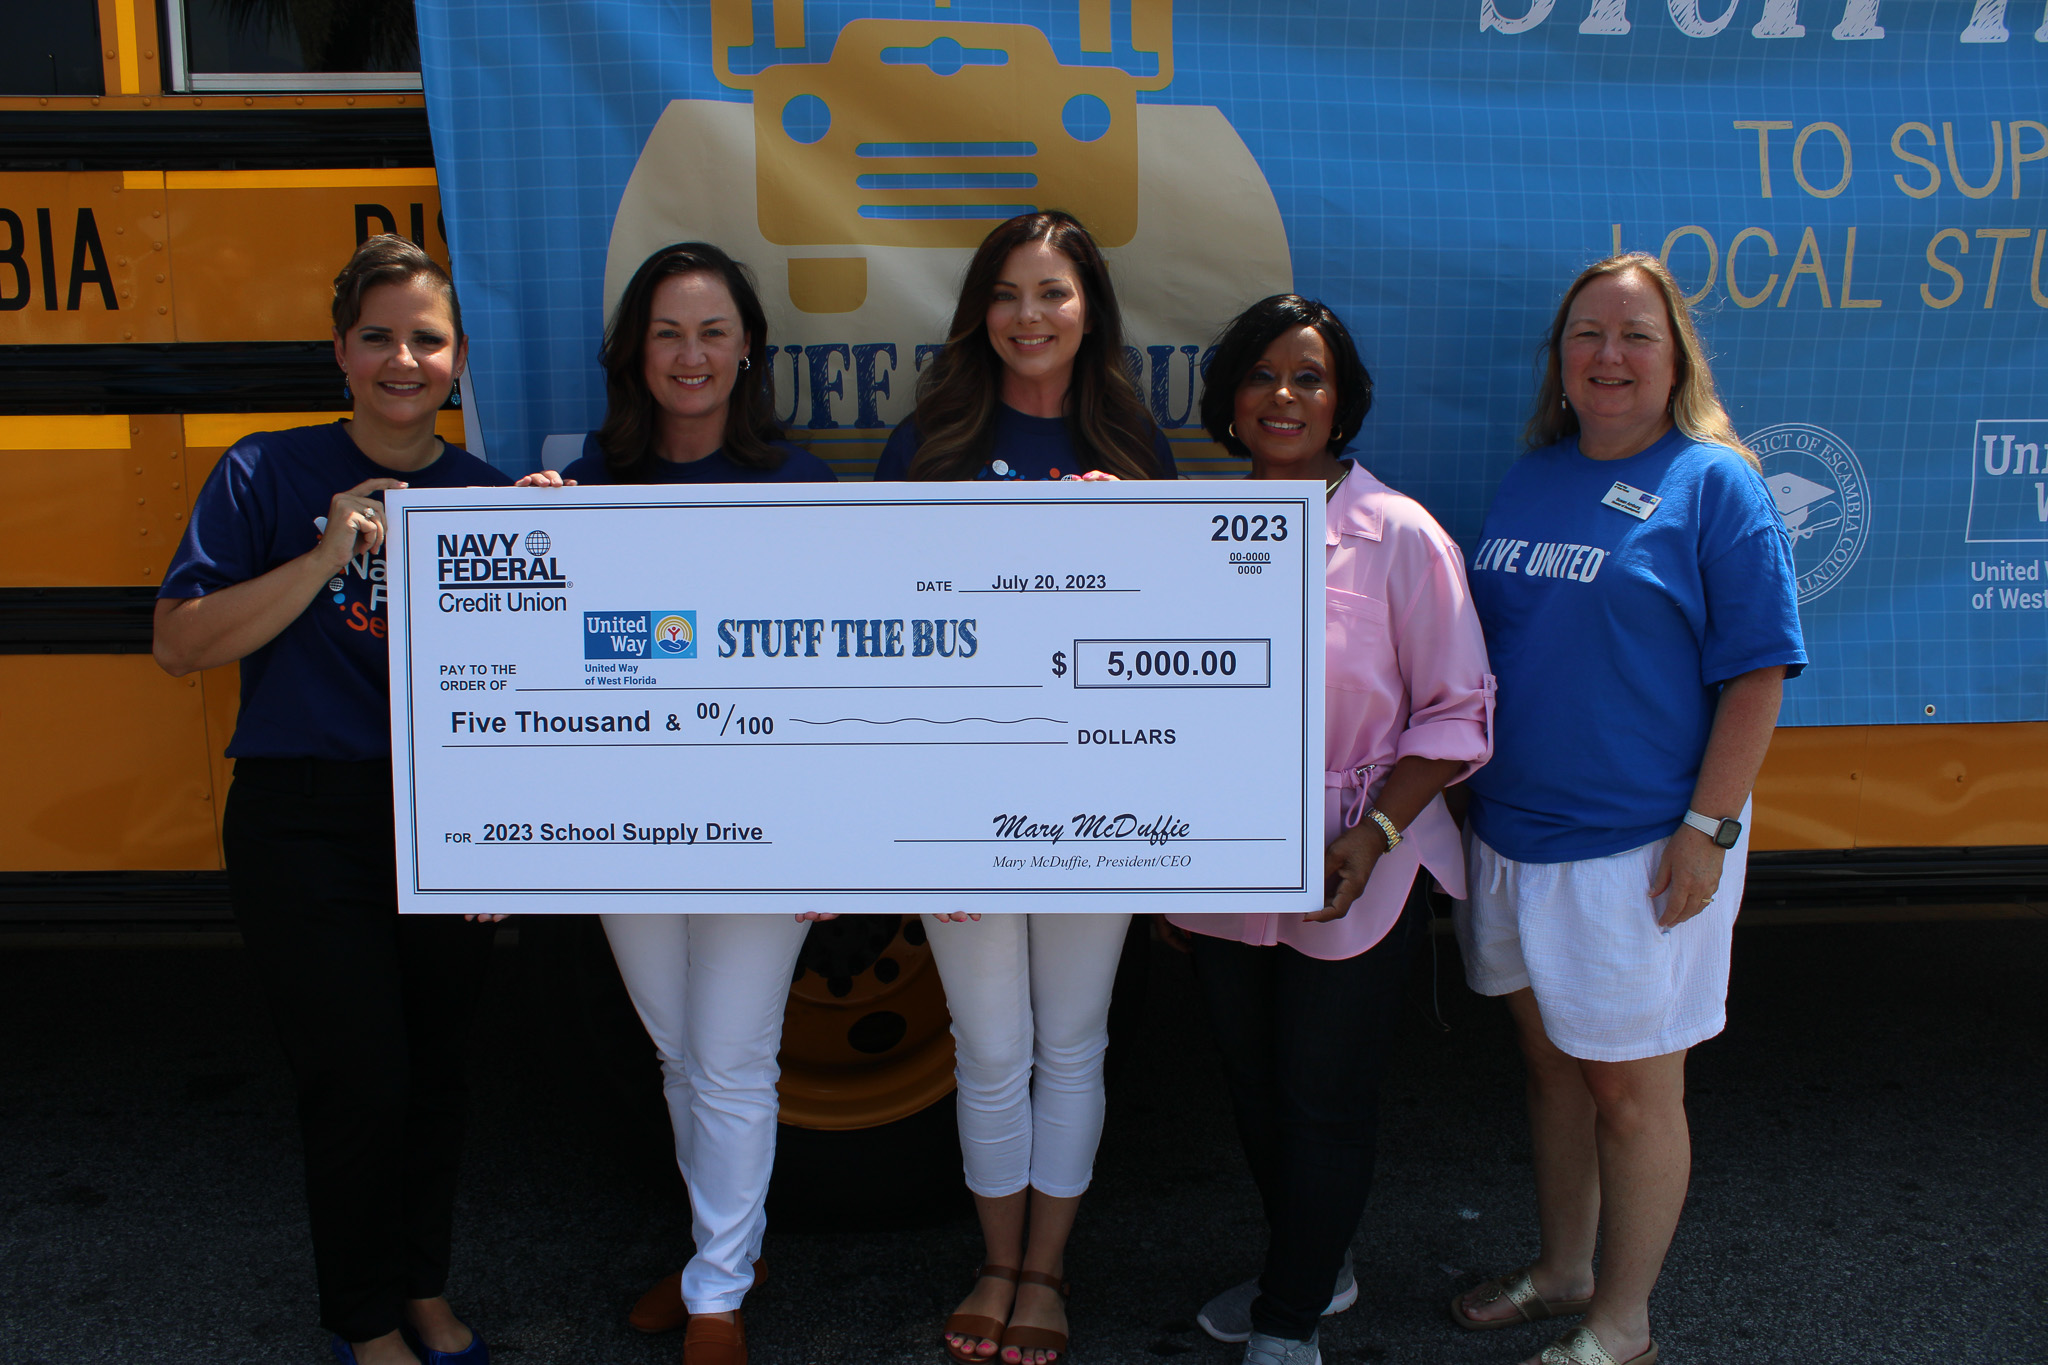 Navy Federal Employees holding $5,000 check in front of Stuff the Bus Bus